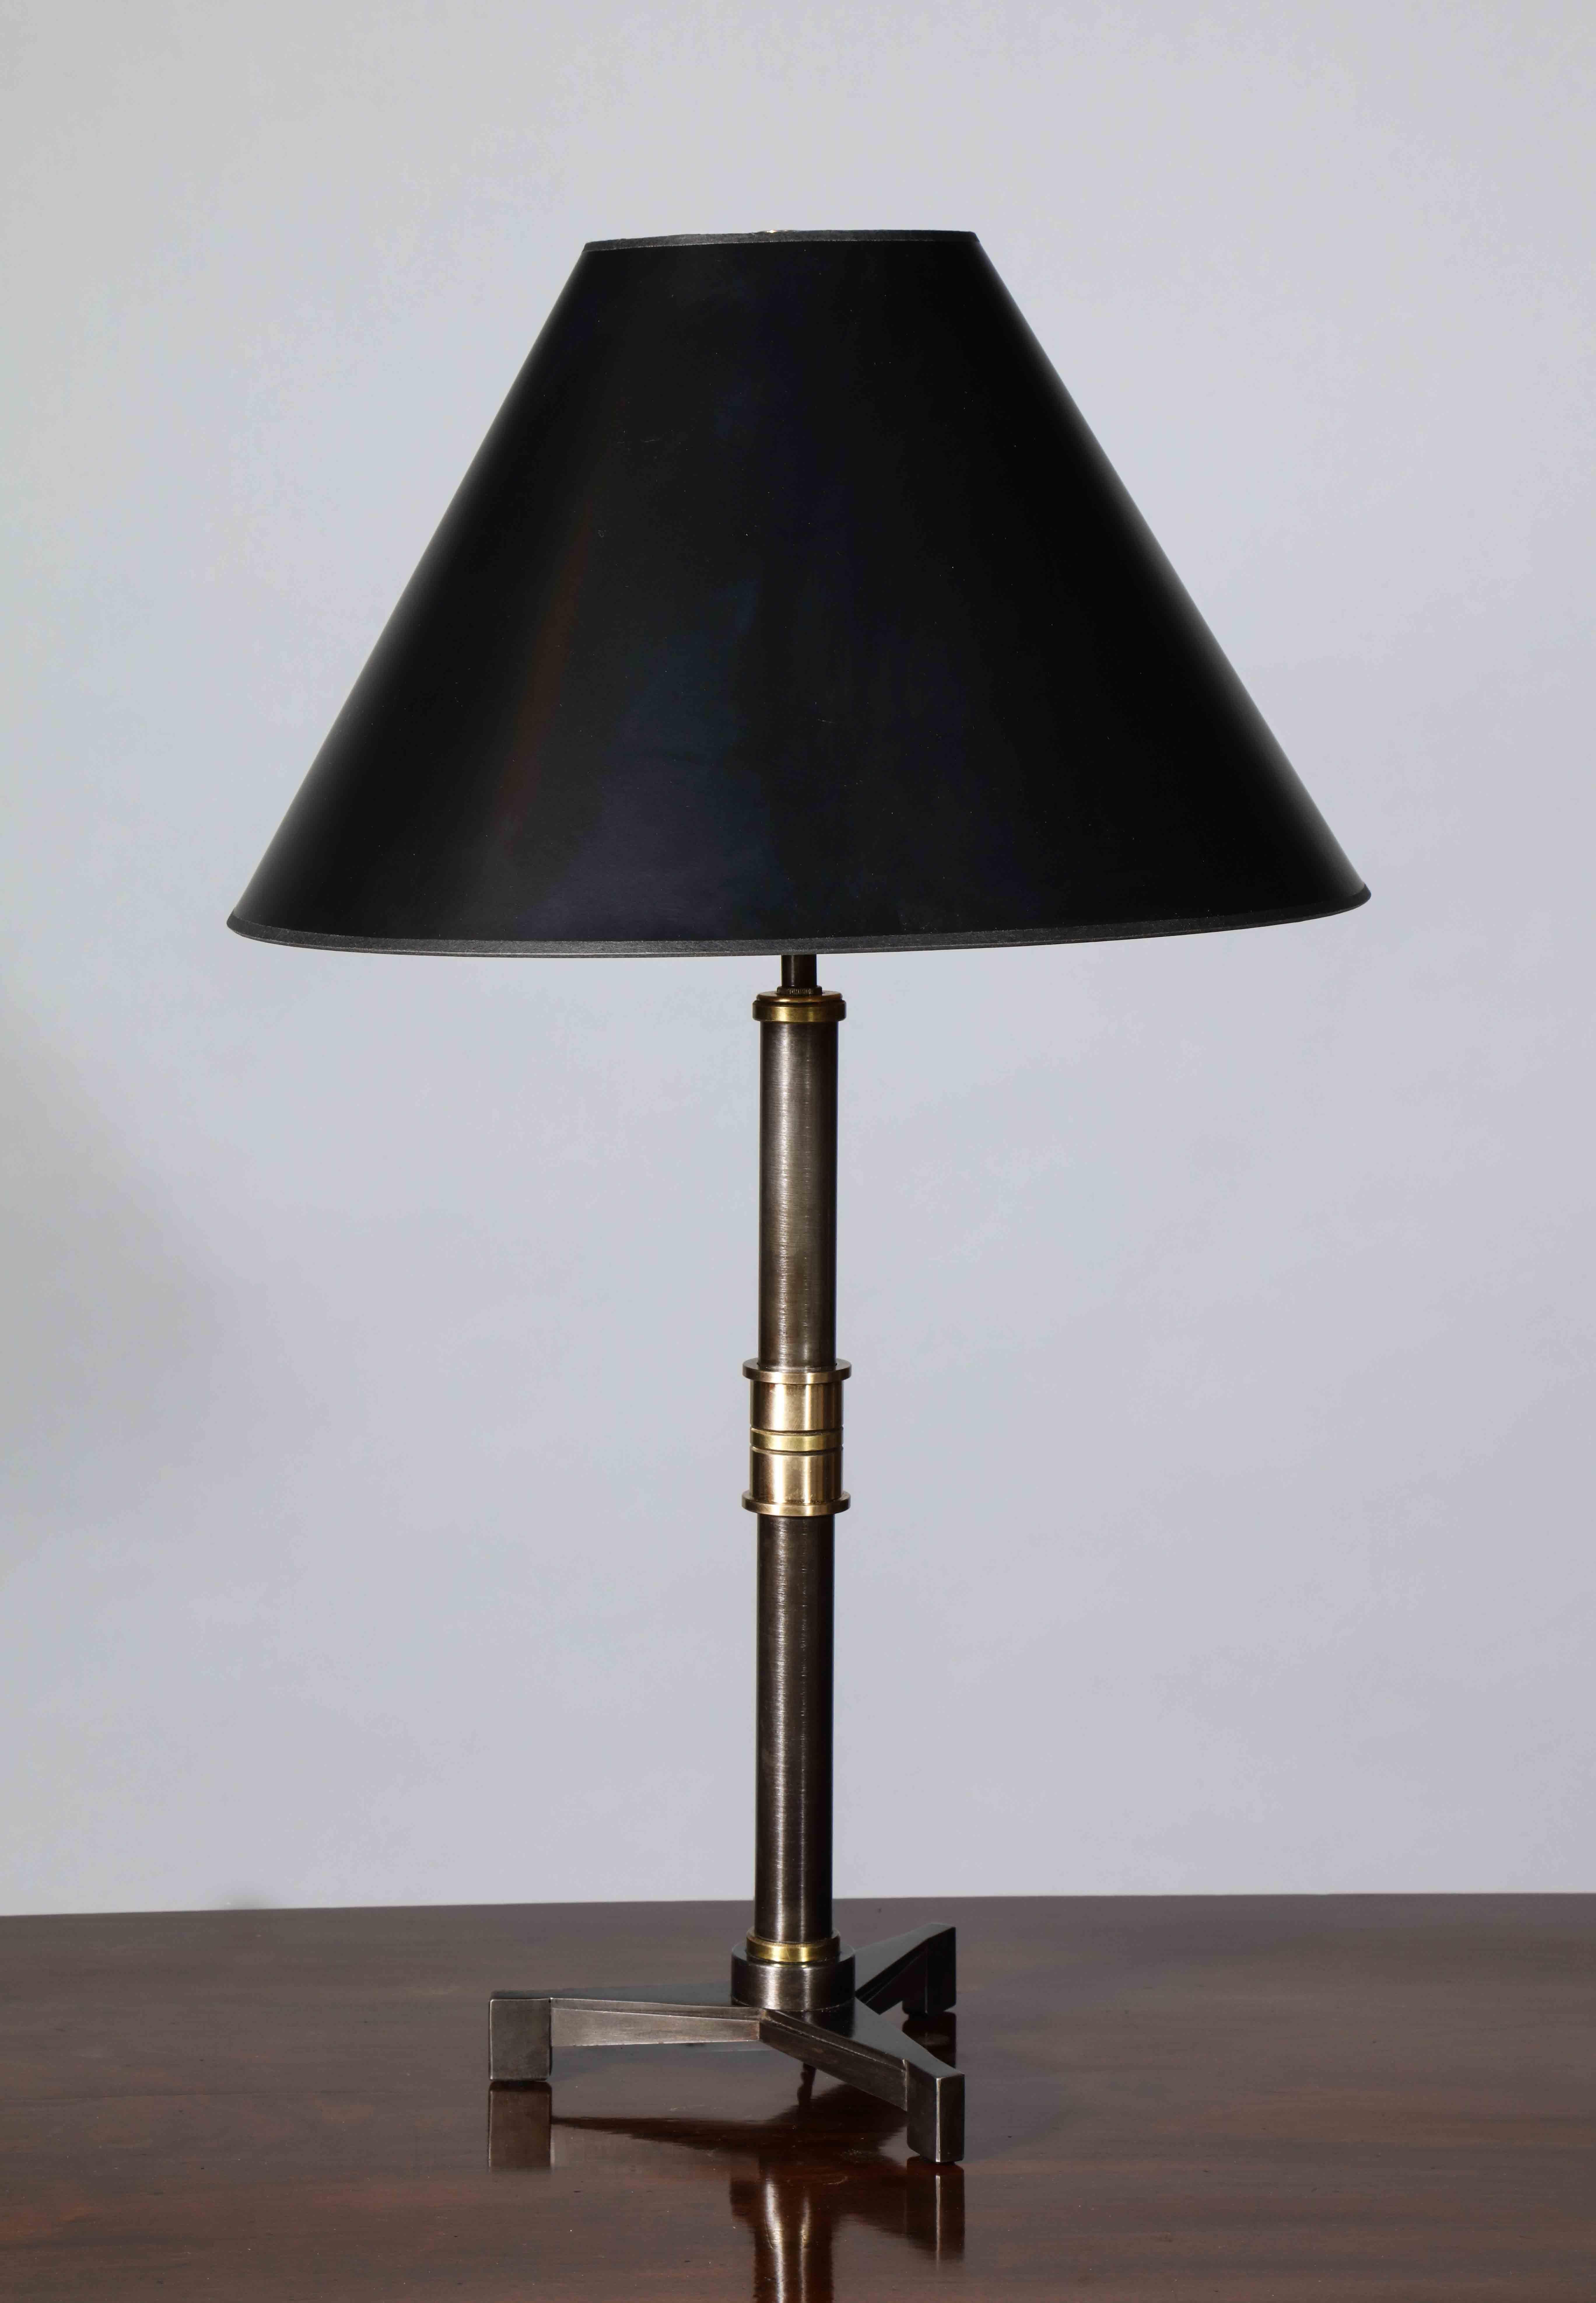 A table lamp with a tri foot base featuring tapered fluting which resonates in the art deco movement. The hilt is realized in a series of subtly contrasting brass and bronze bands. This design is also inspired by the mid-century French Neoclassical